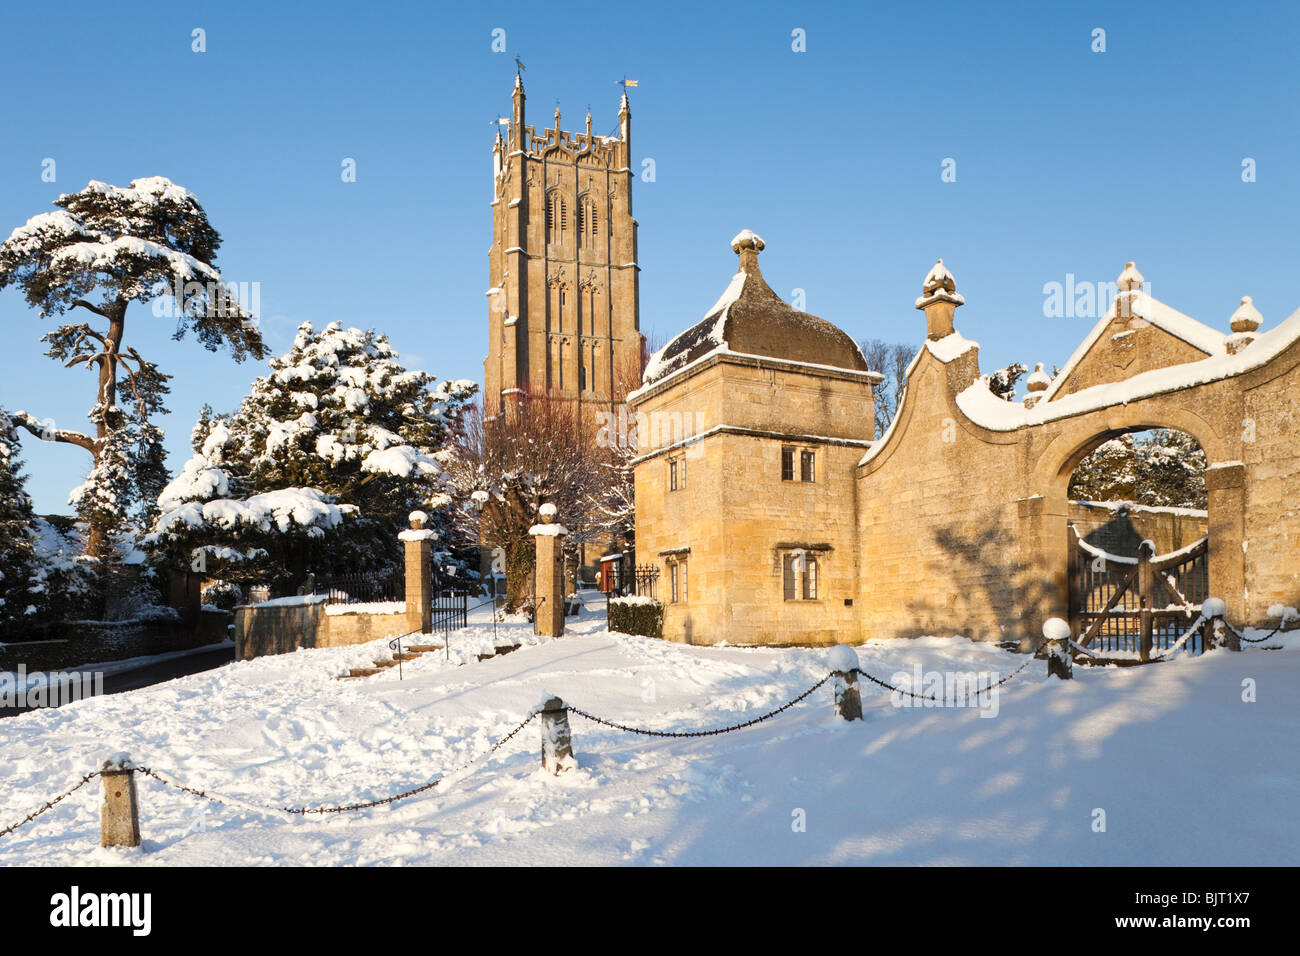 Winter snow on St James church and the Jacobean lodges in the Cotswold town of Chipping Campden, Gloucestershire Stock Photo